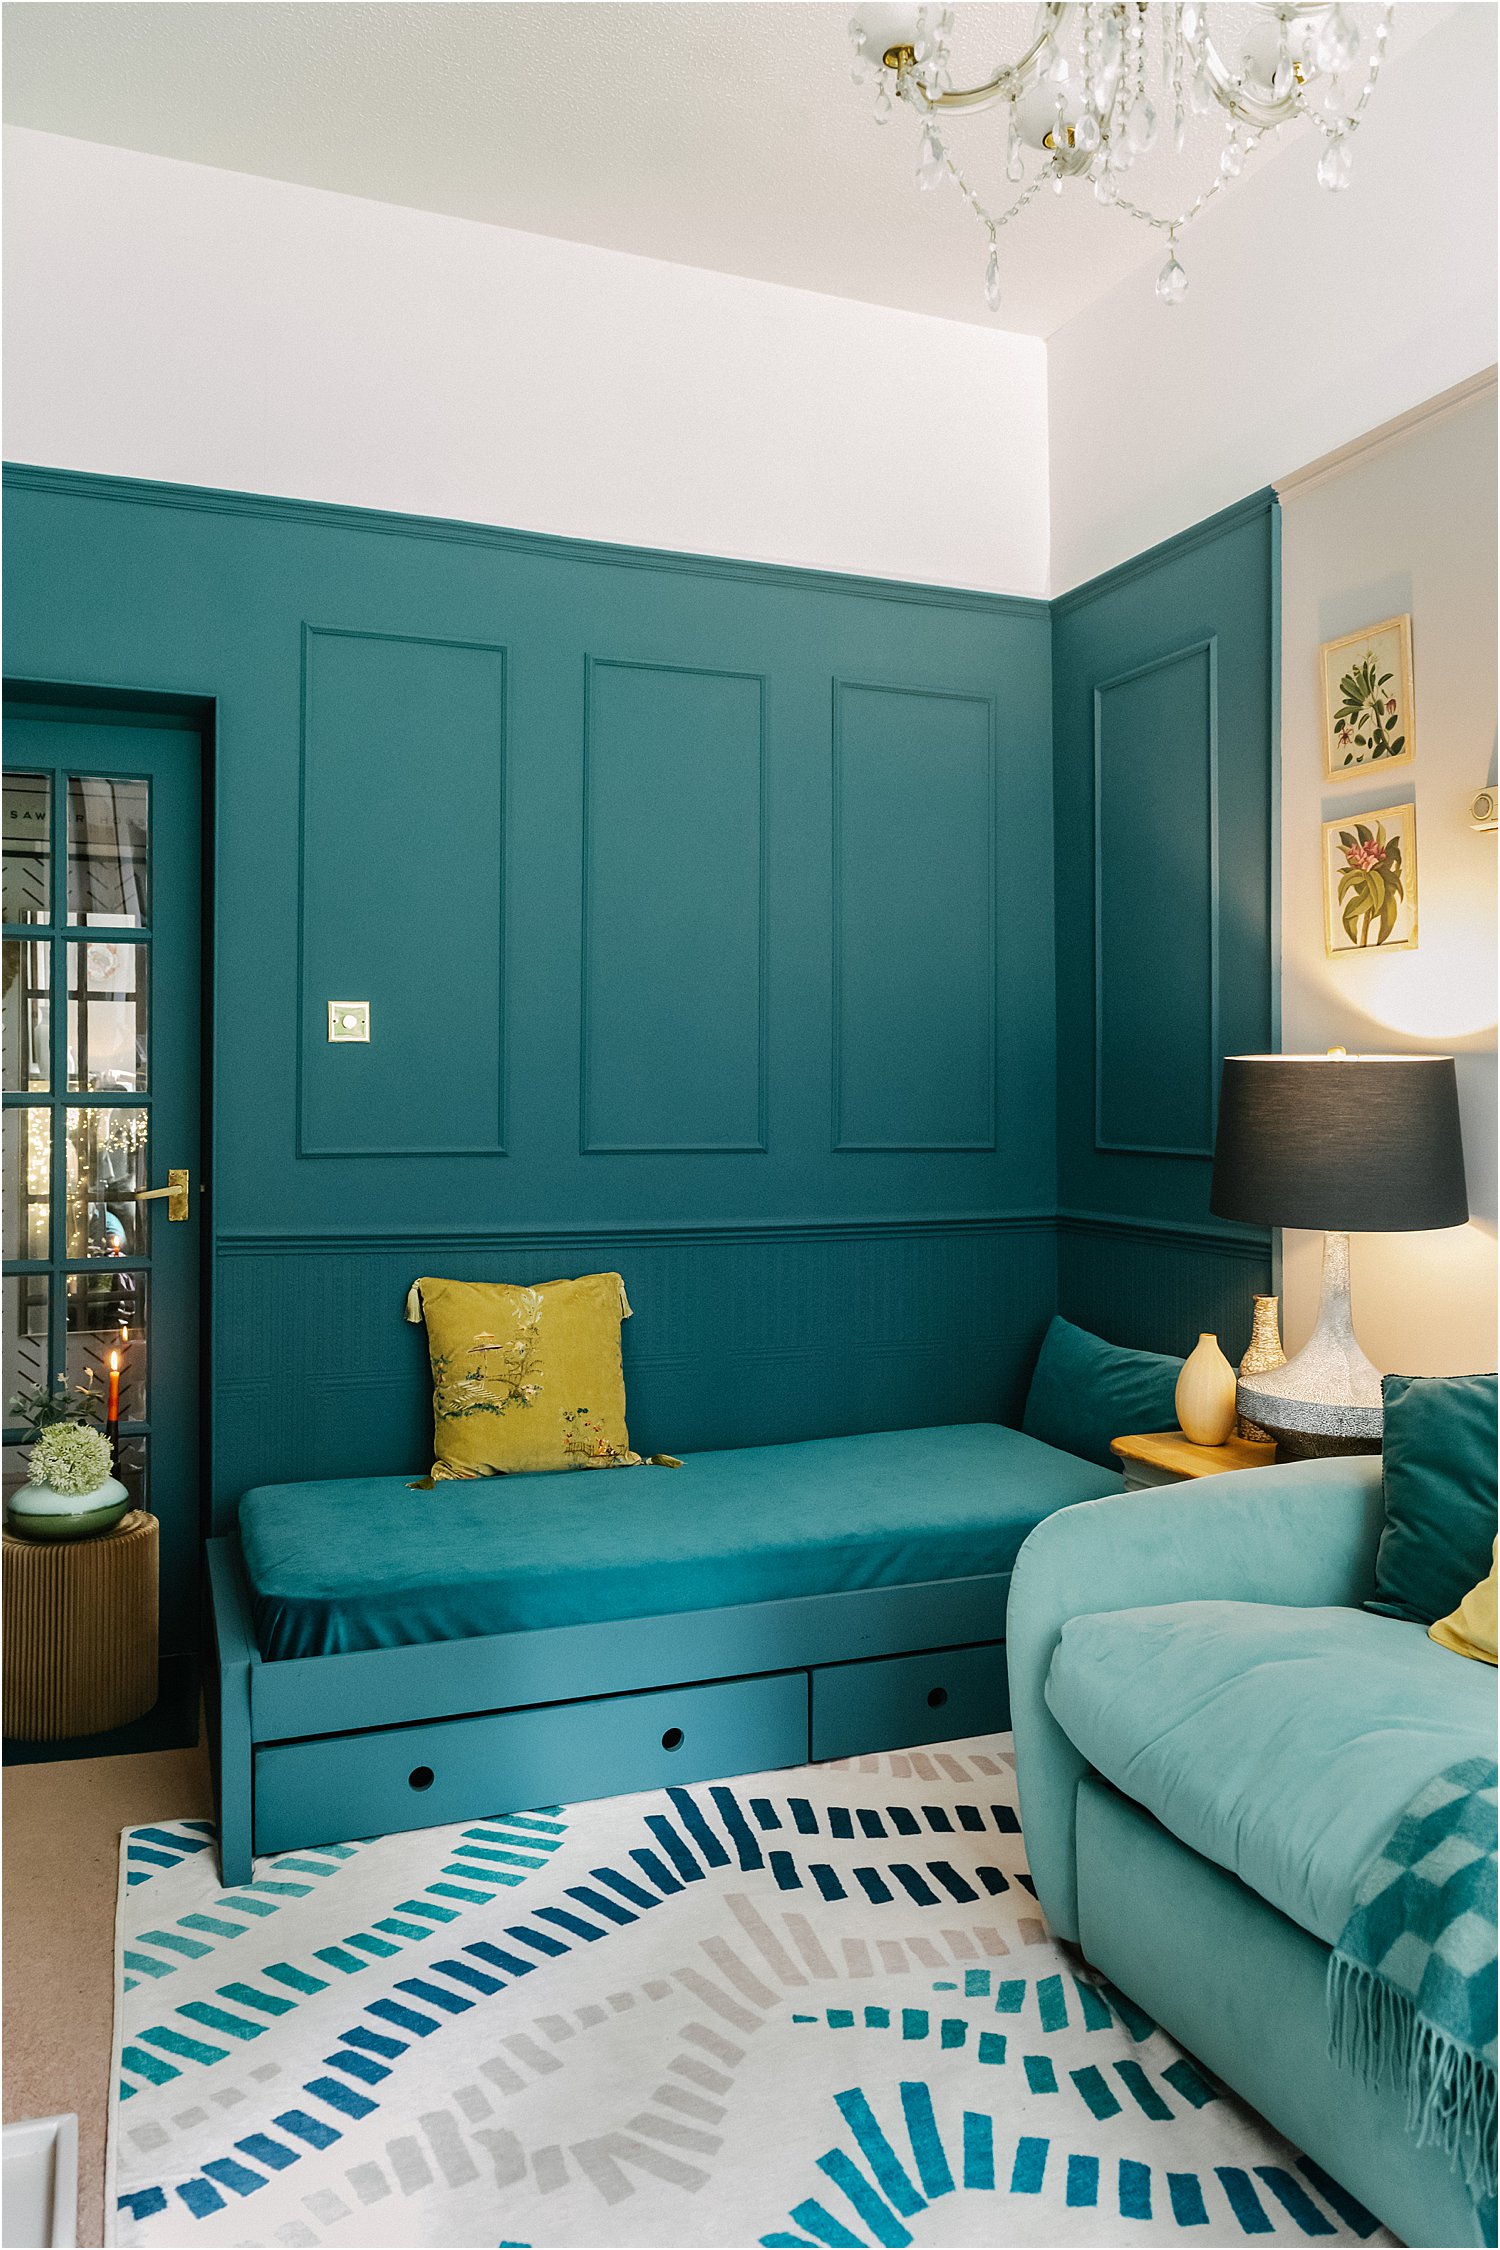 3-easy-steps-in-zoning-interior-spaces-crown-paint-lily-sawyer-photo-layered-home